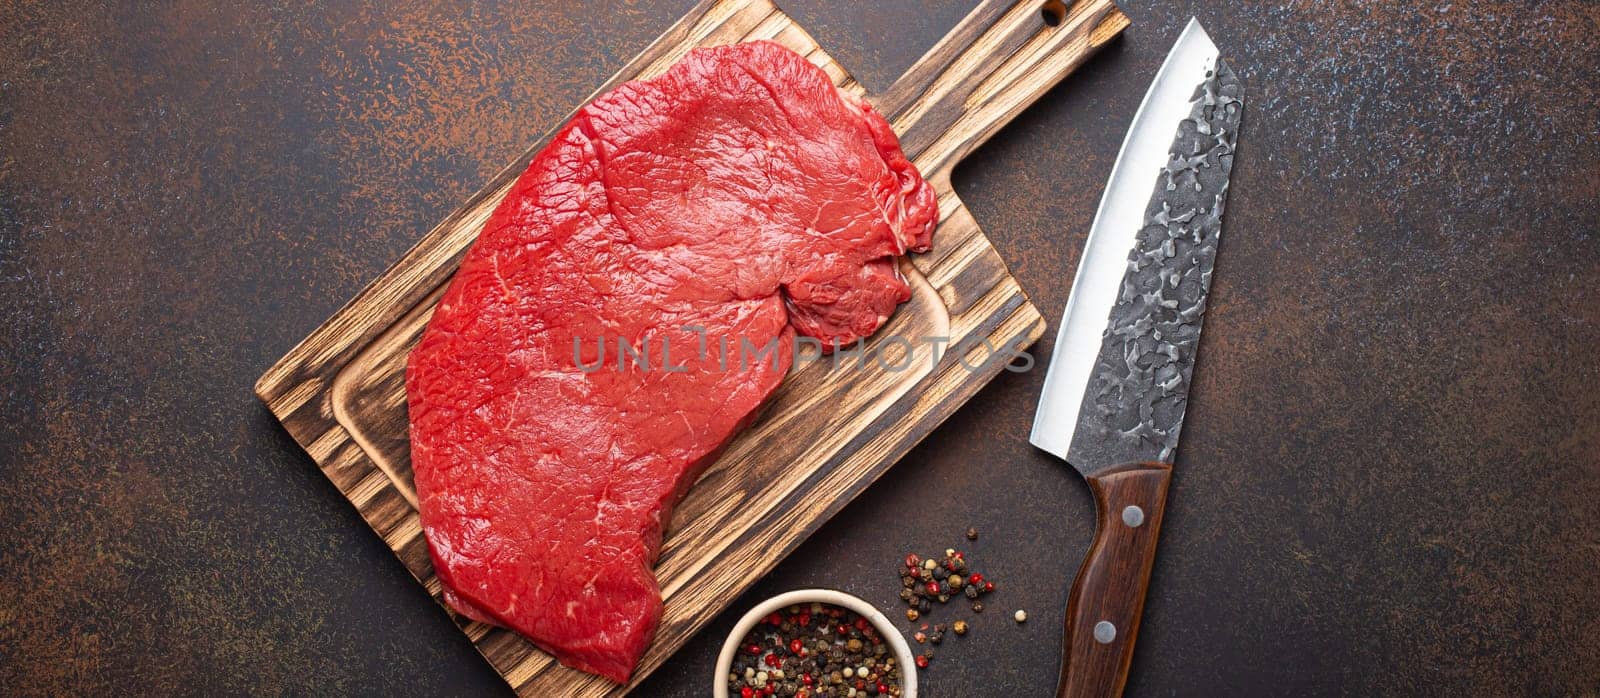 Raw uncooked top round beef steak on wooden cutting board with big kitchen knife and pepper on dark brown rustic stone background top view, cooking meat steak concept